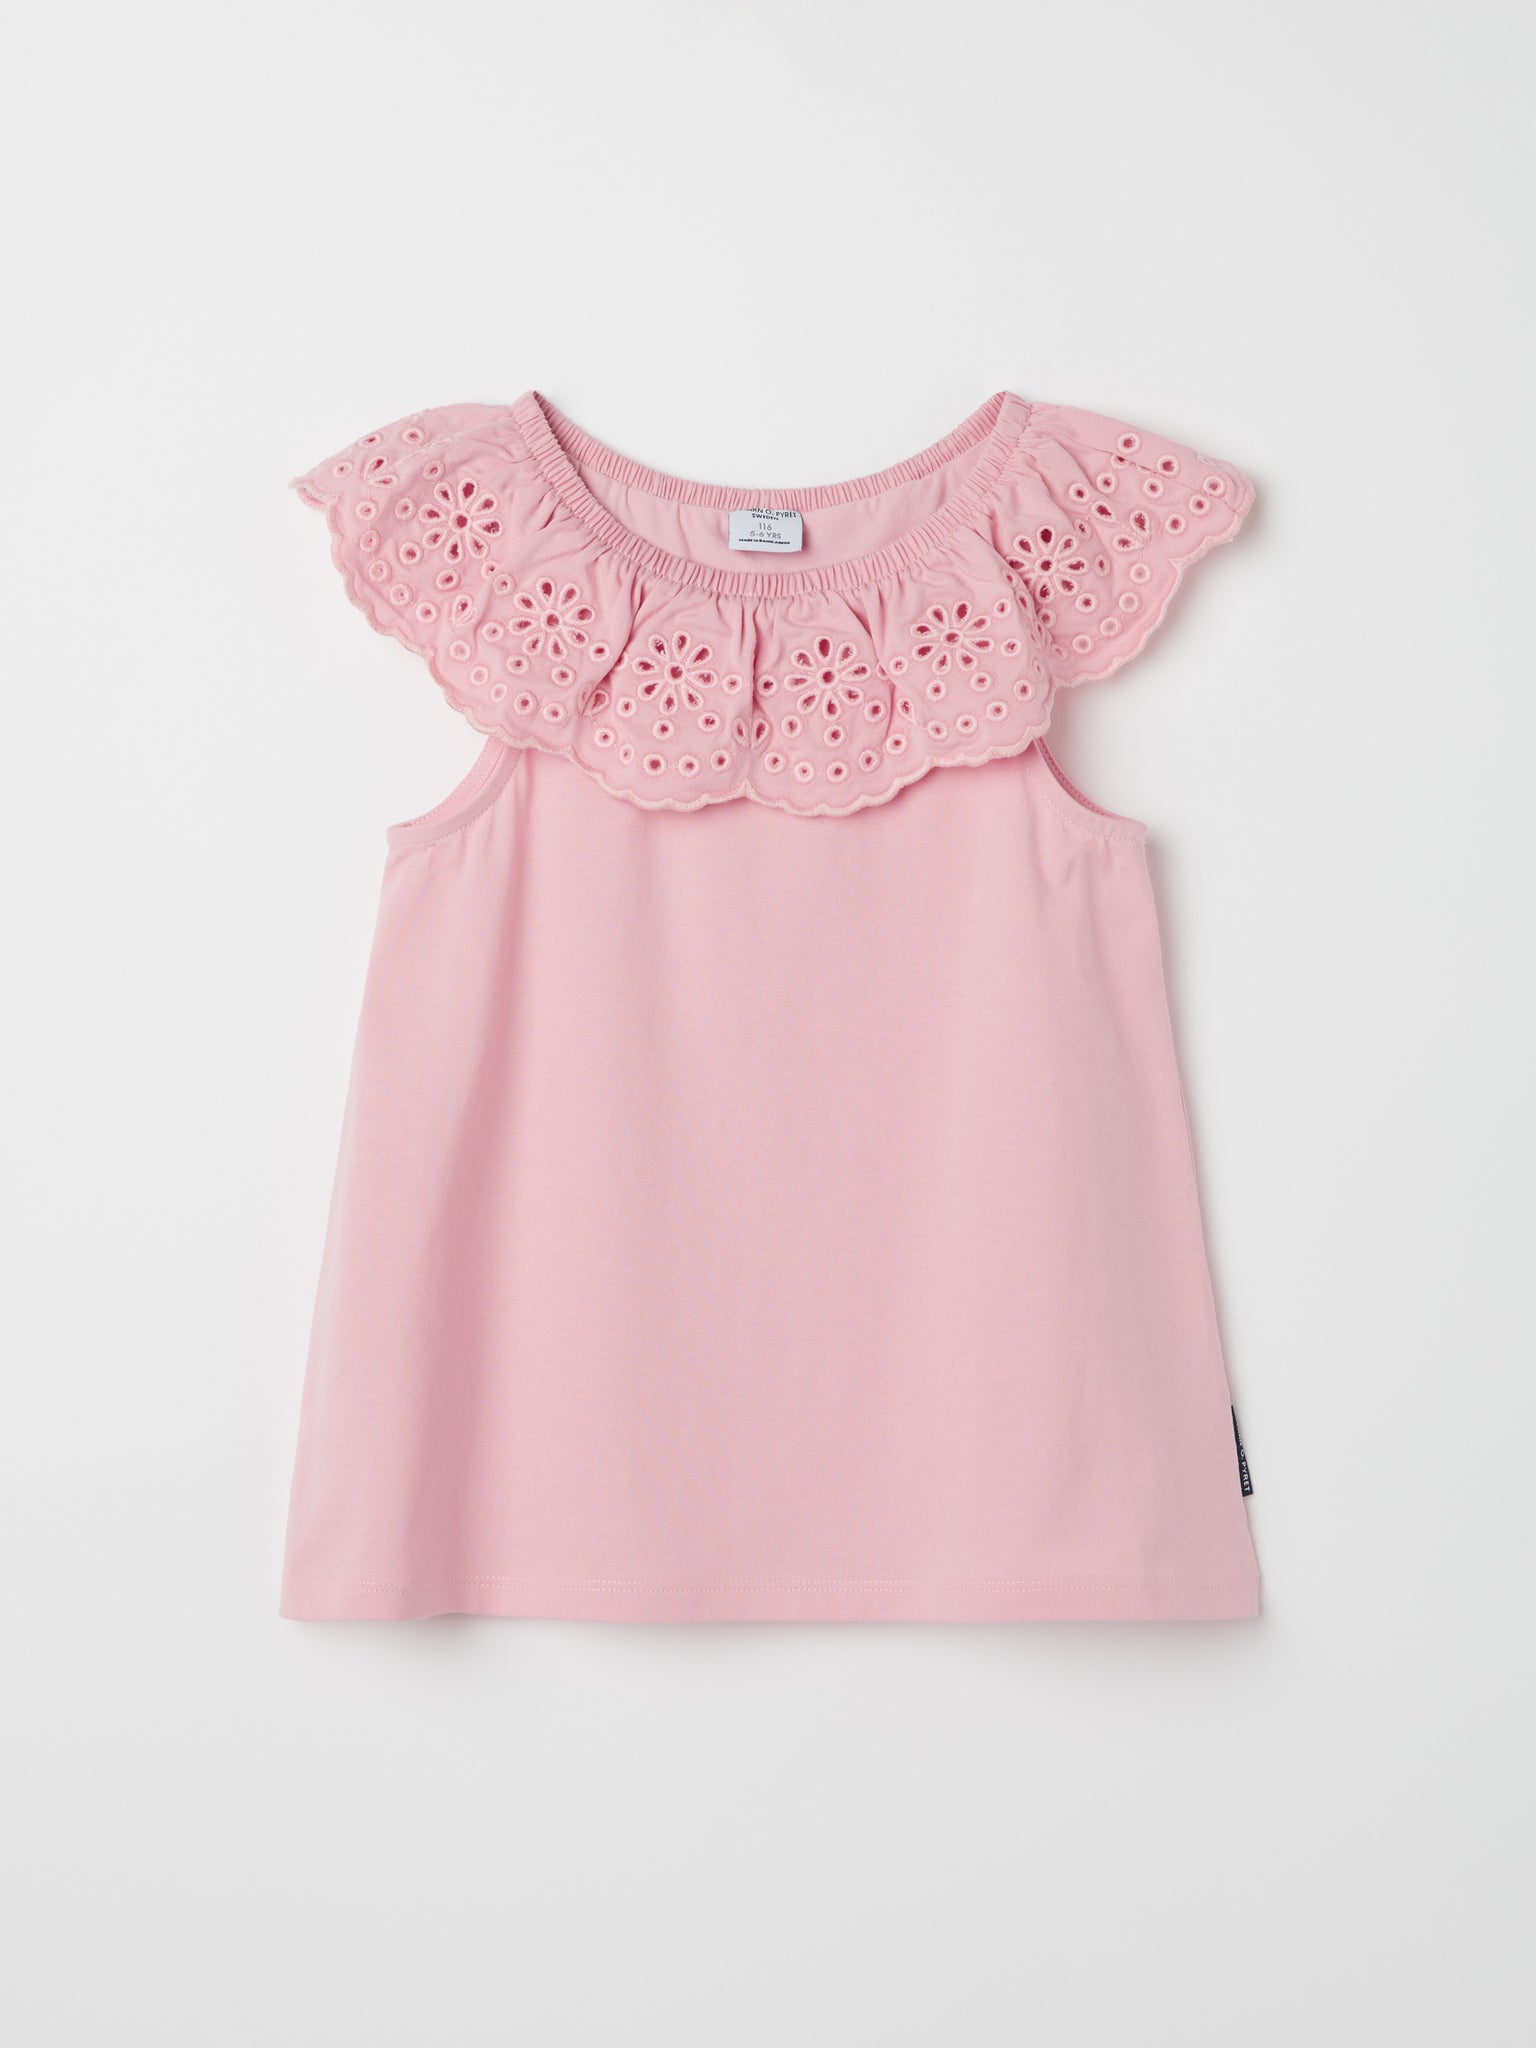 Embroidered Pink Organic Cotton Kids Top from the Polarn O. Pyret kidswear collection. Ethically produced kids clothing.